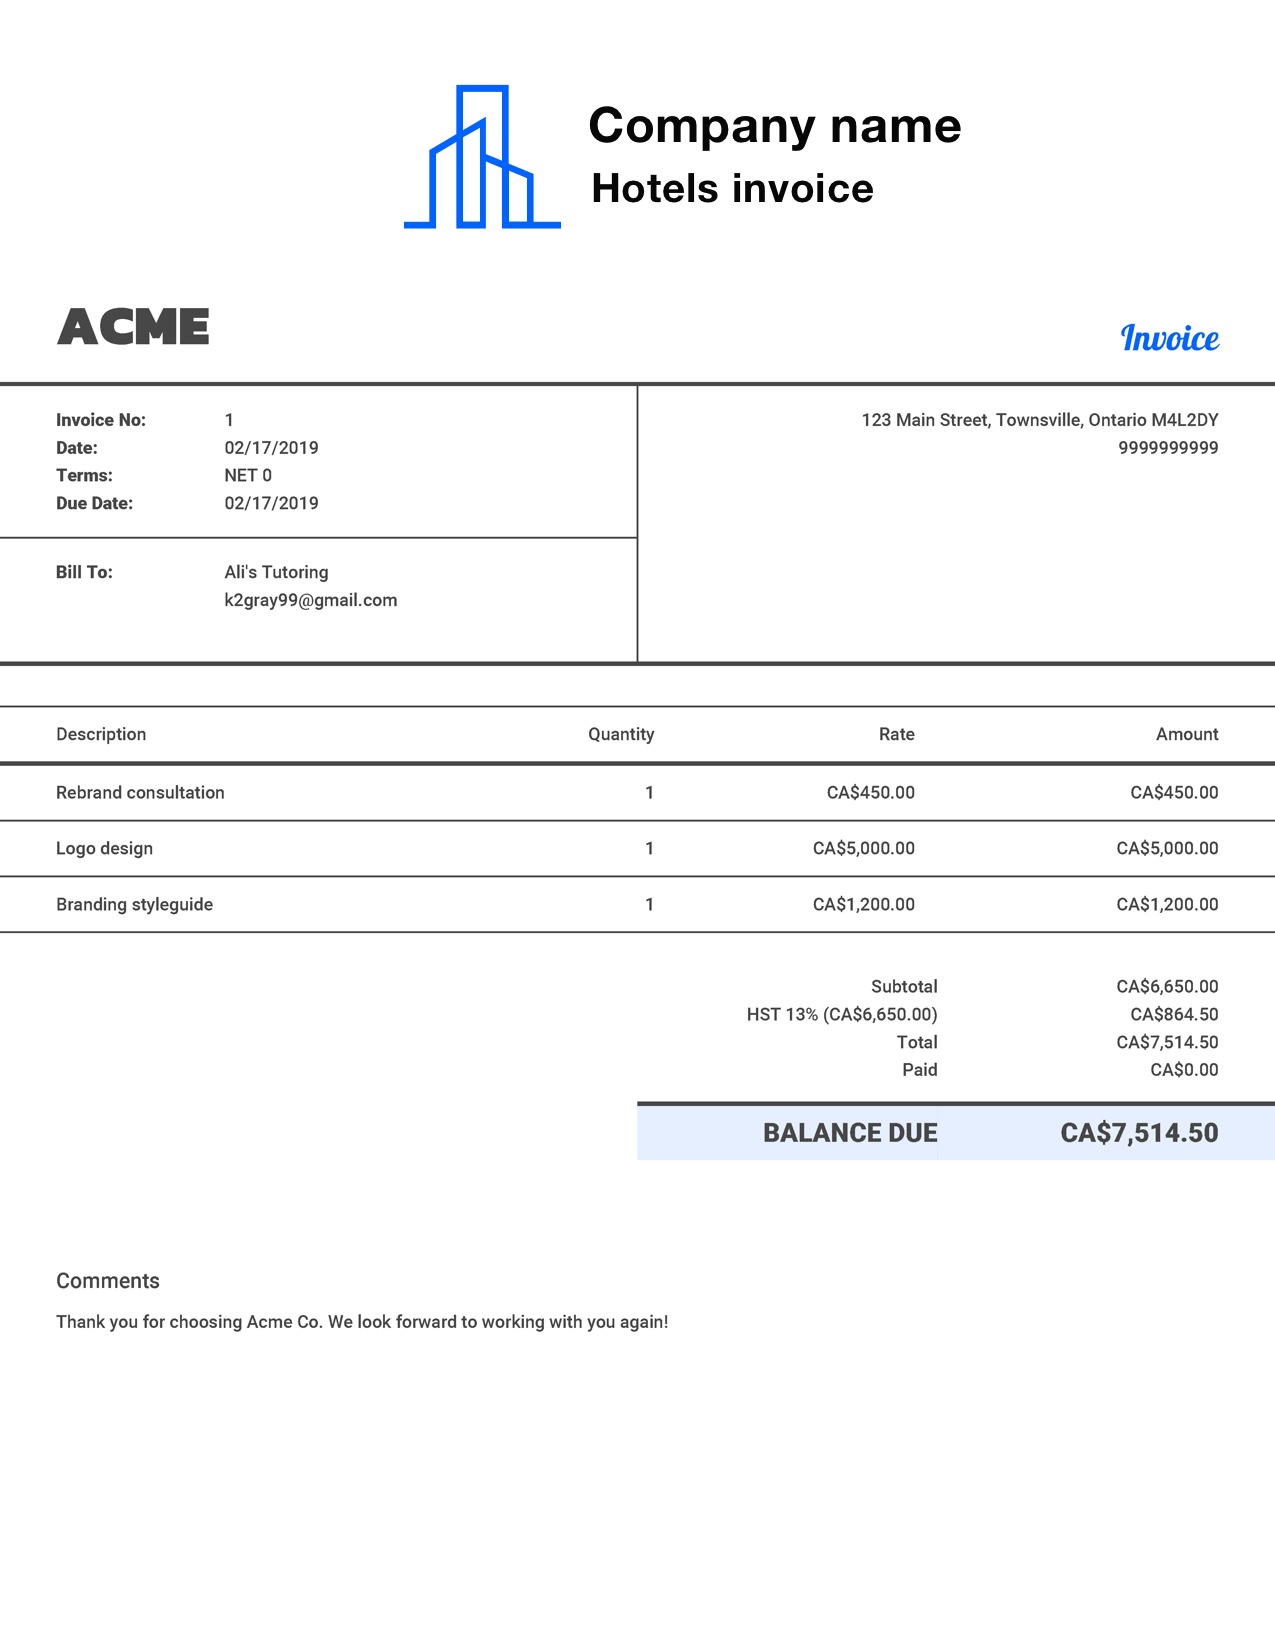 Free Hotel Invoice Template. Customize and Send in 90 Seconds